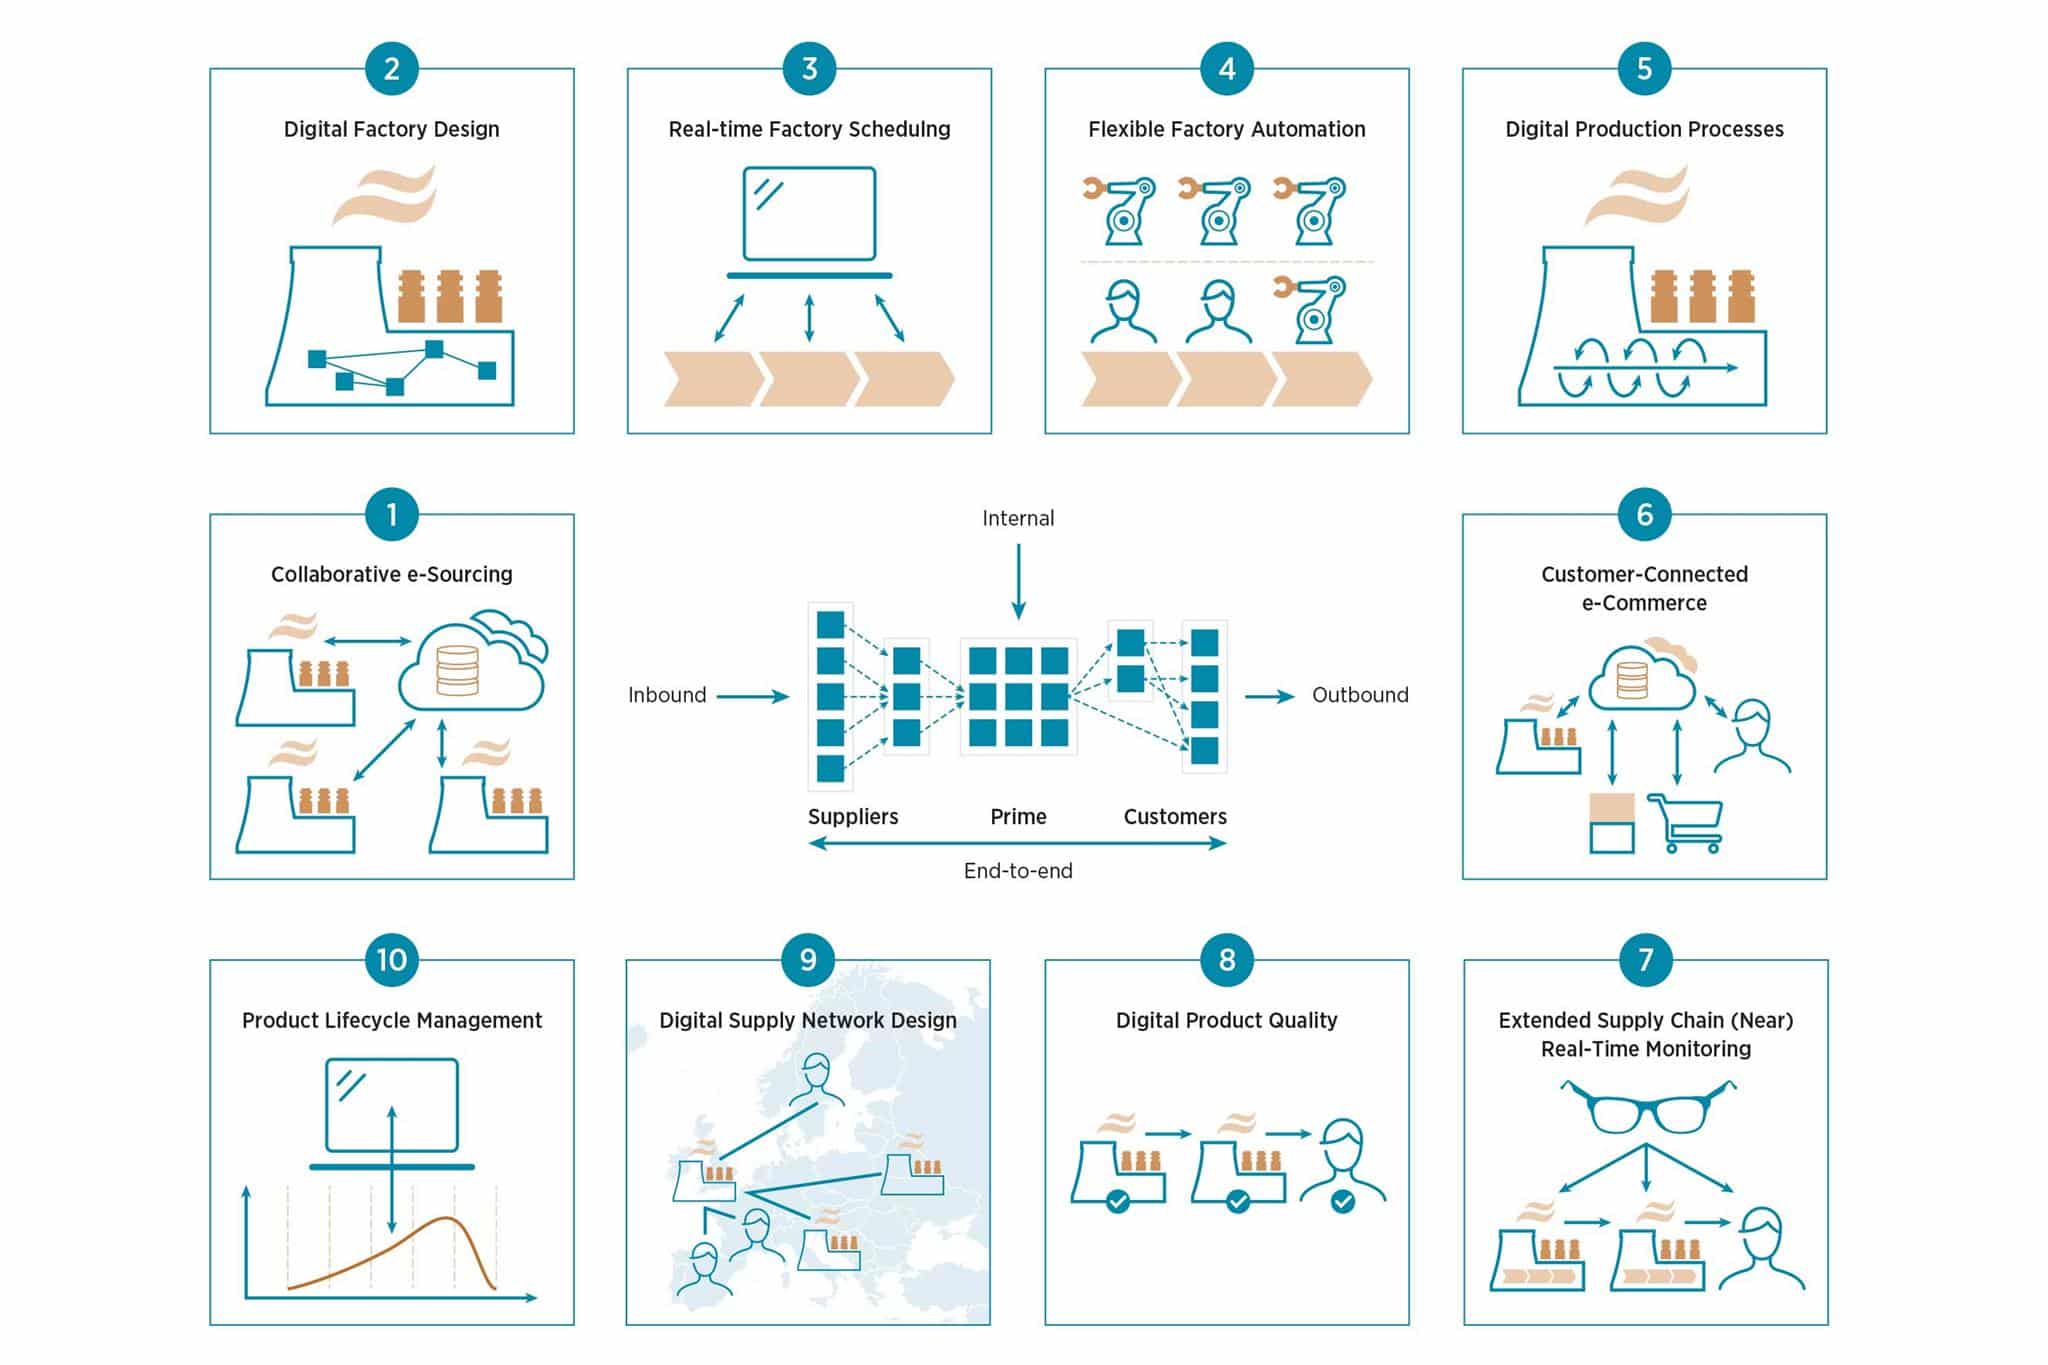 Diagram from IfM research showing ten future digital supply chain scenarios